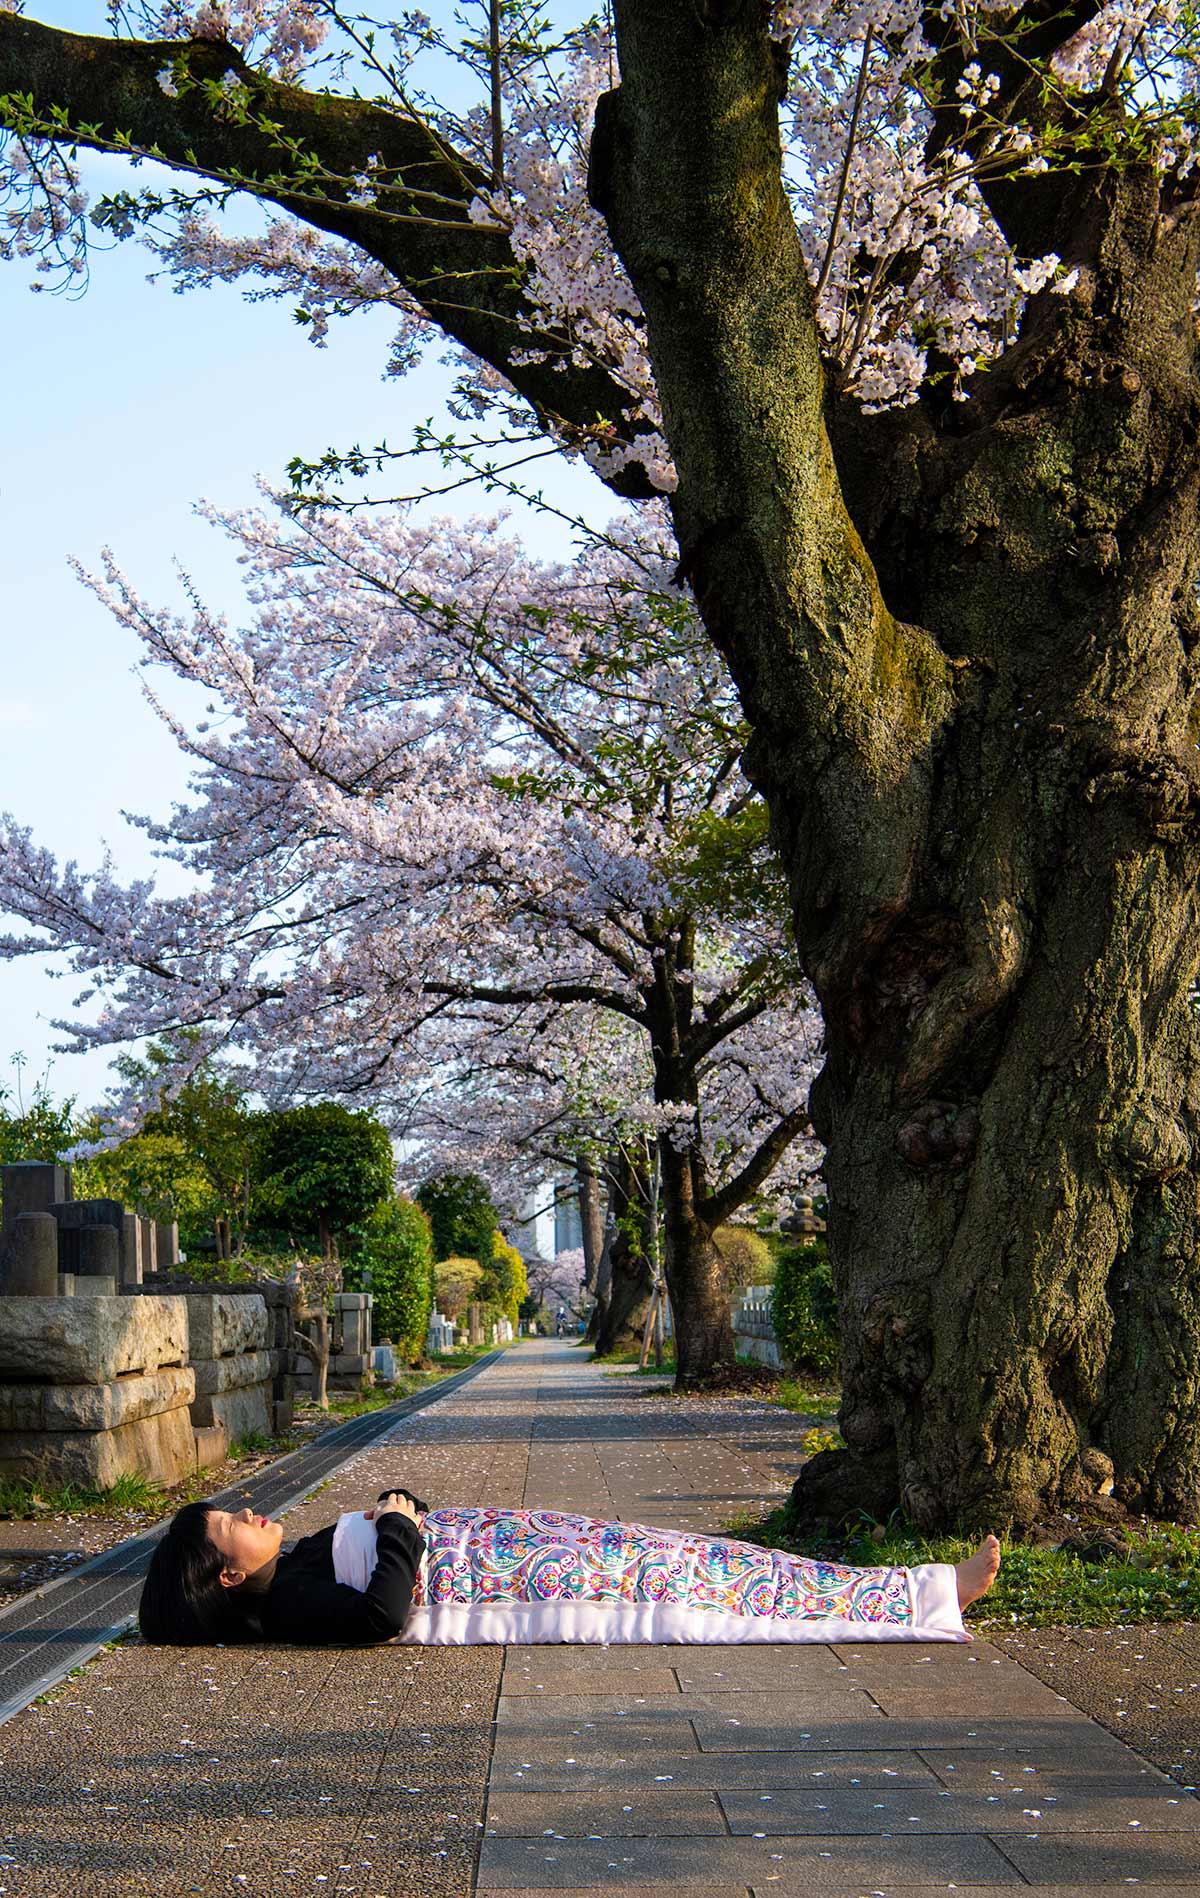 Chun Hua Catherine Dong performs death ritual under cherry blossoms in Tokyo